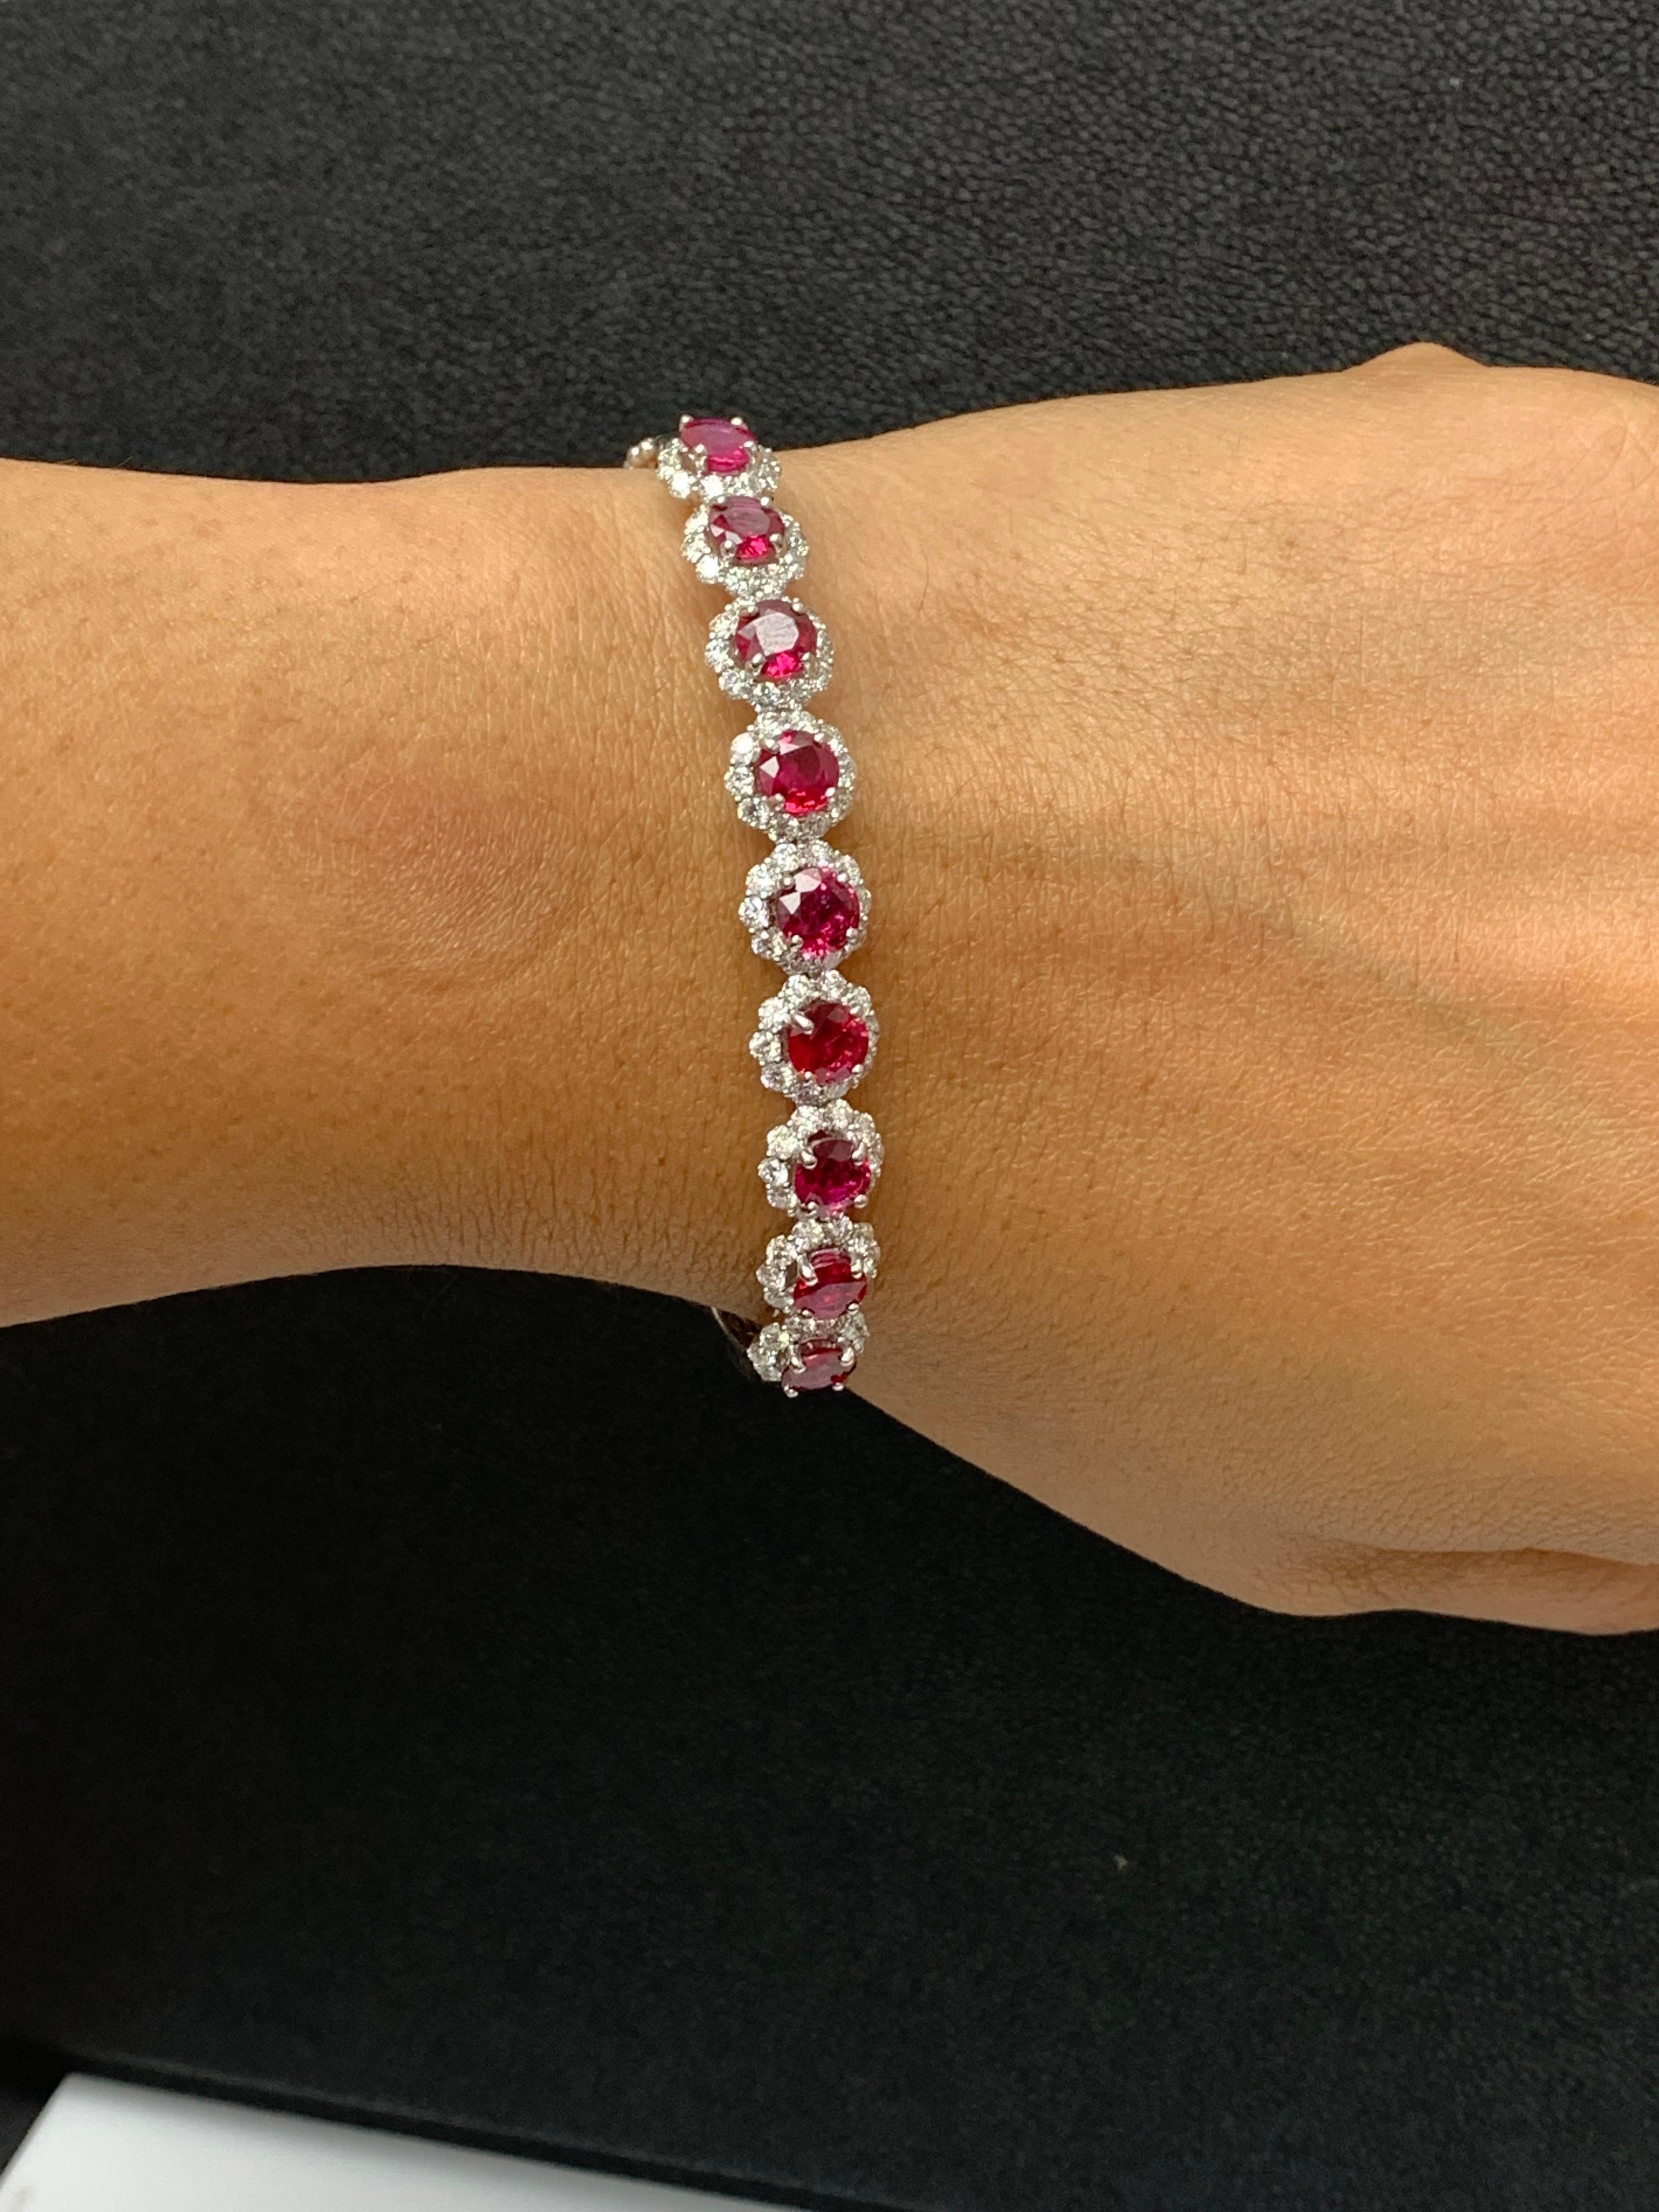 4.76 Carat Brilliant Cut Ruby and Diamond Bangle Bracelet in 18k White Gold For Sale 1